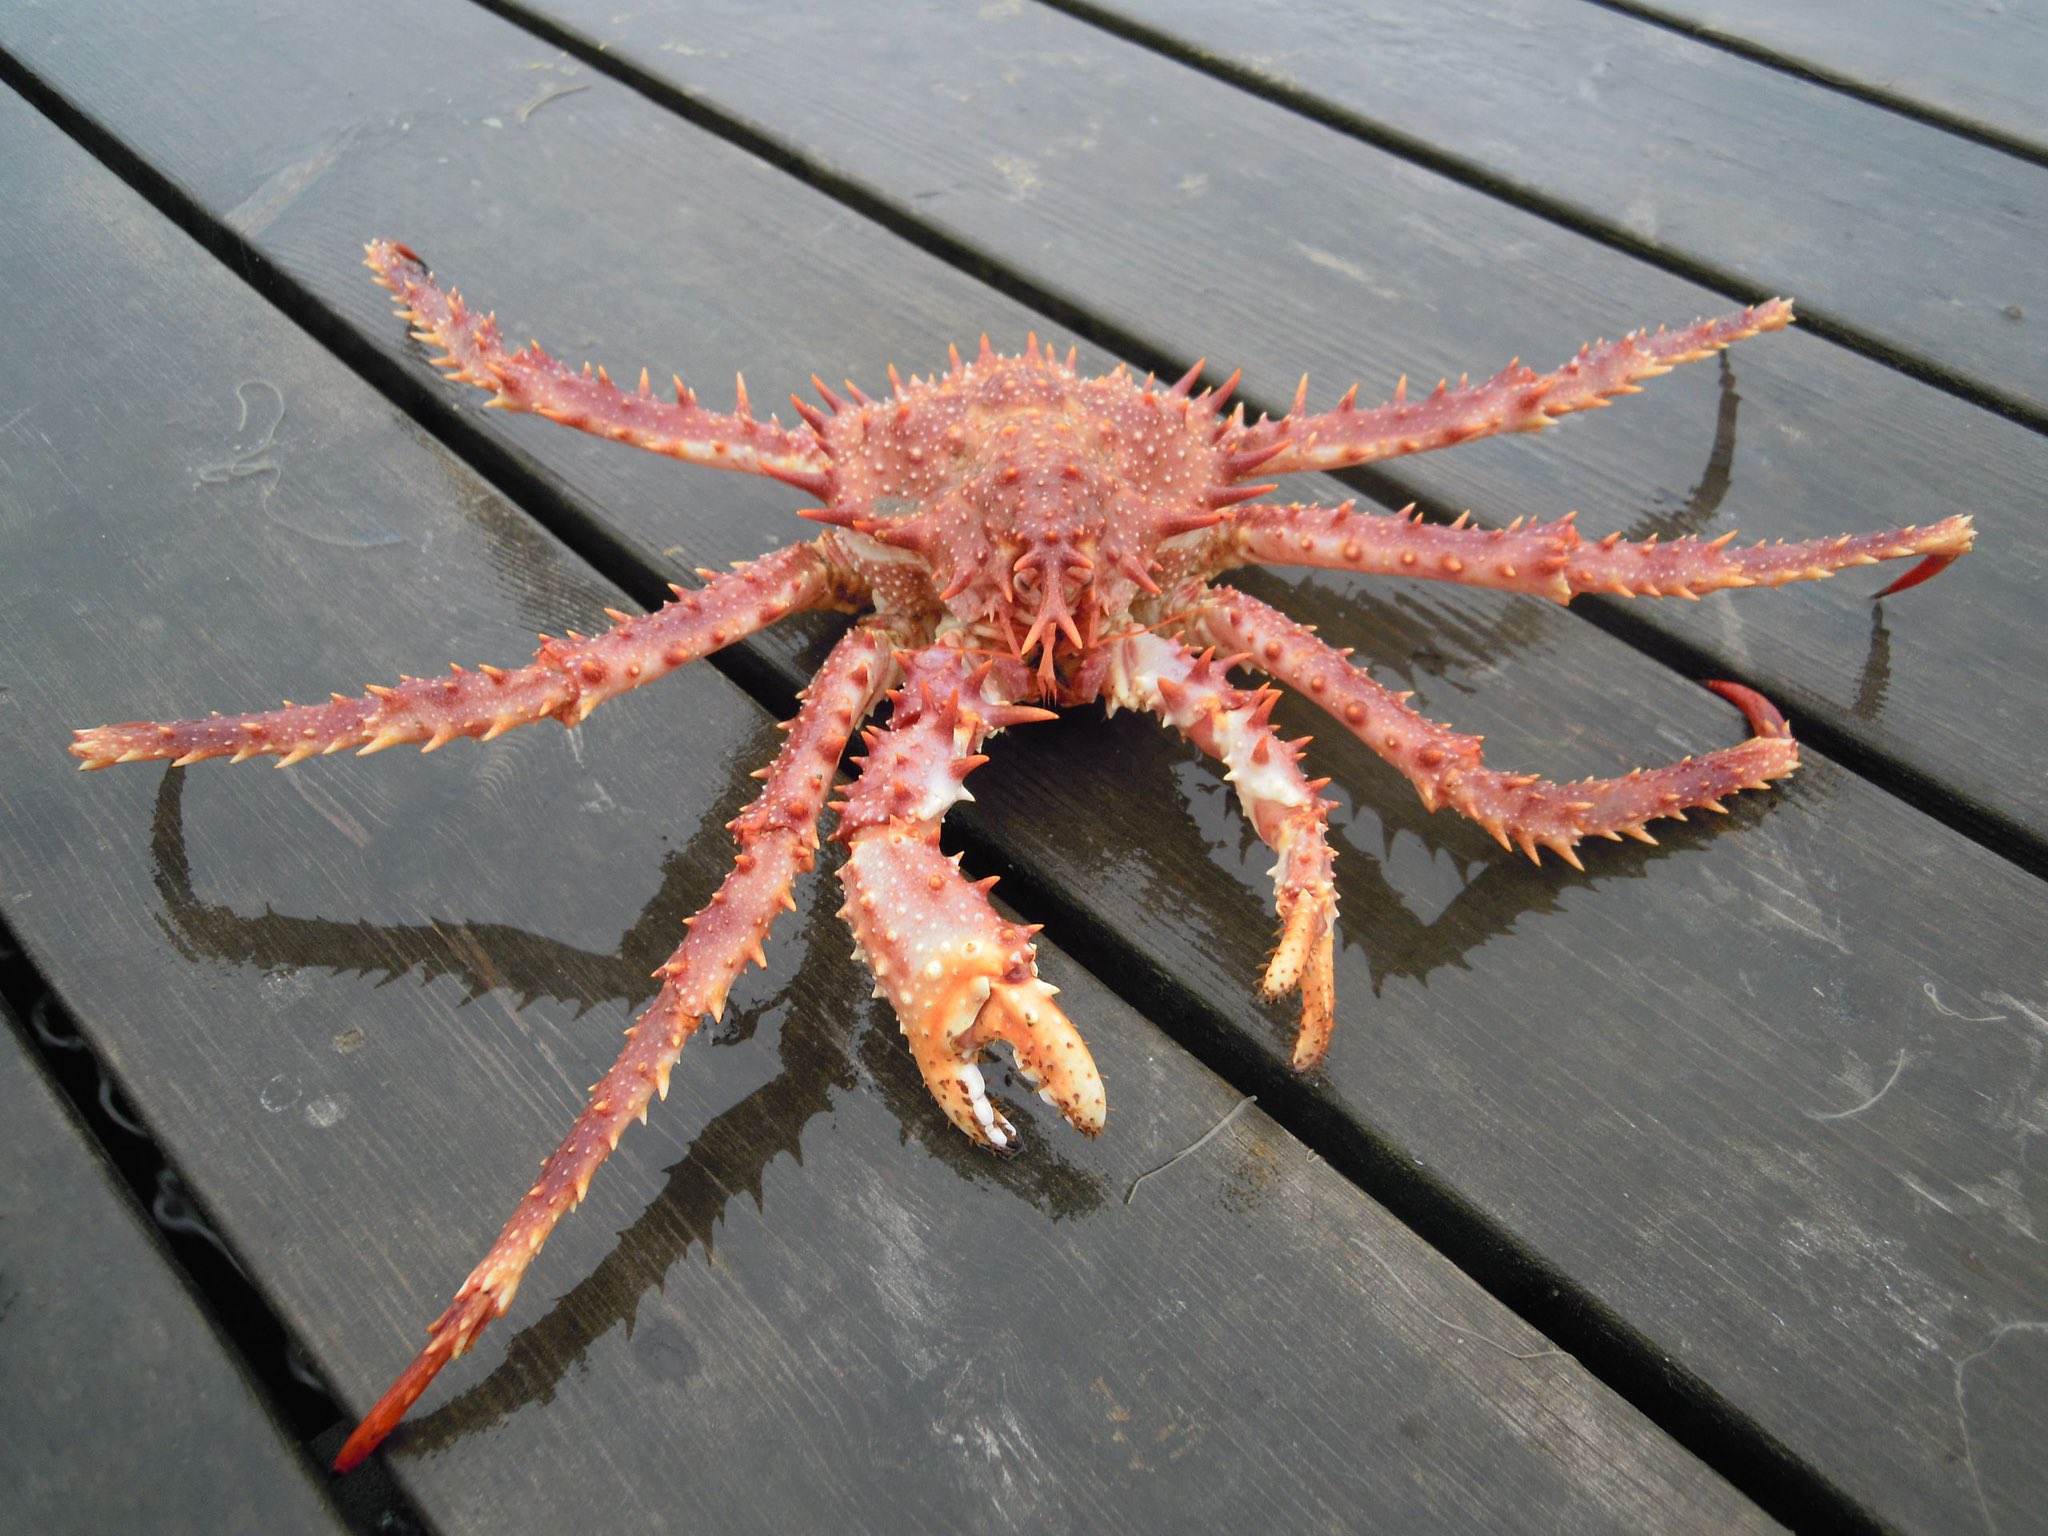 Ronnings - They're here! The new King Crab orange collection from